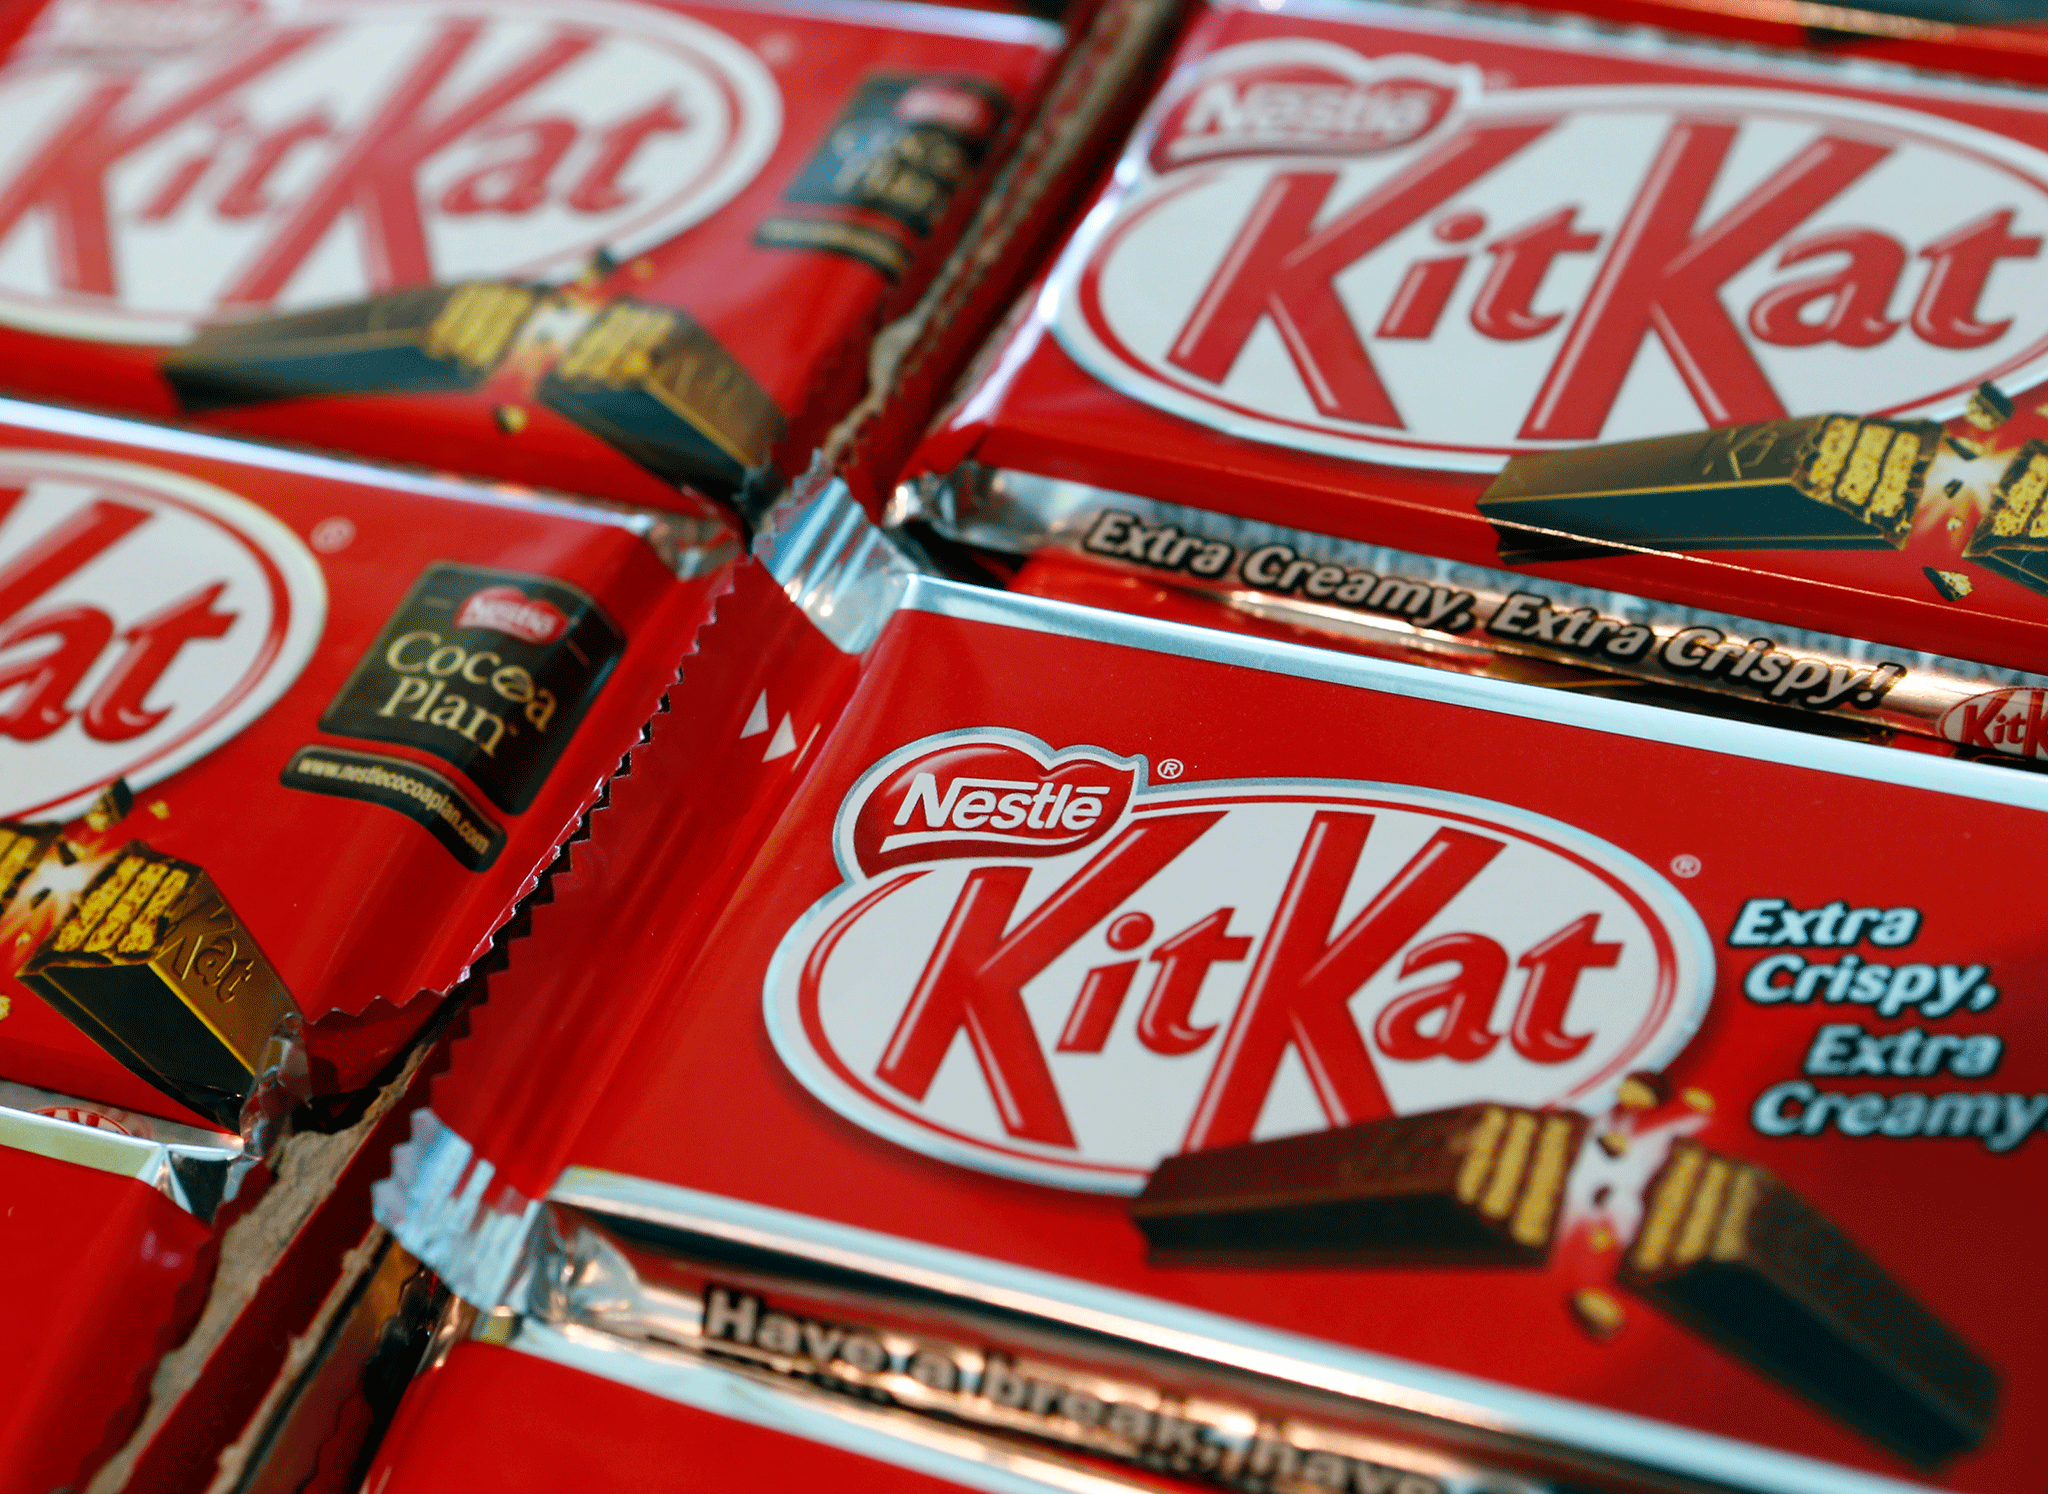 The Kit Kat company is aiming for revenue growth of between 2 and 4 per cent this year